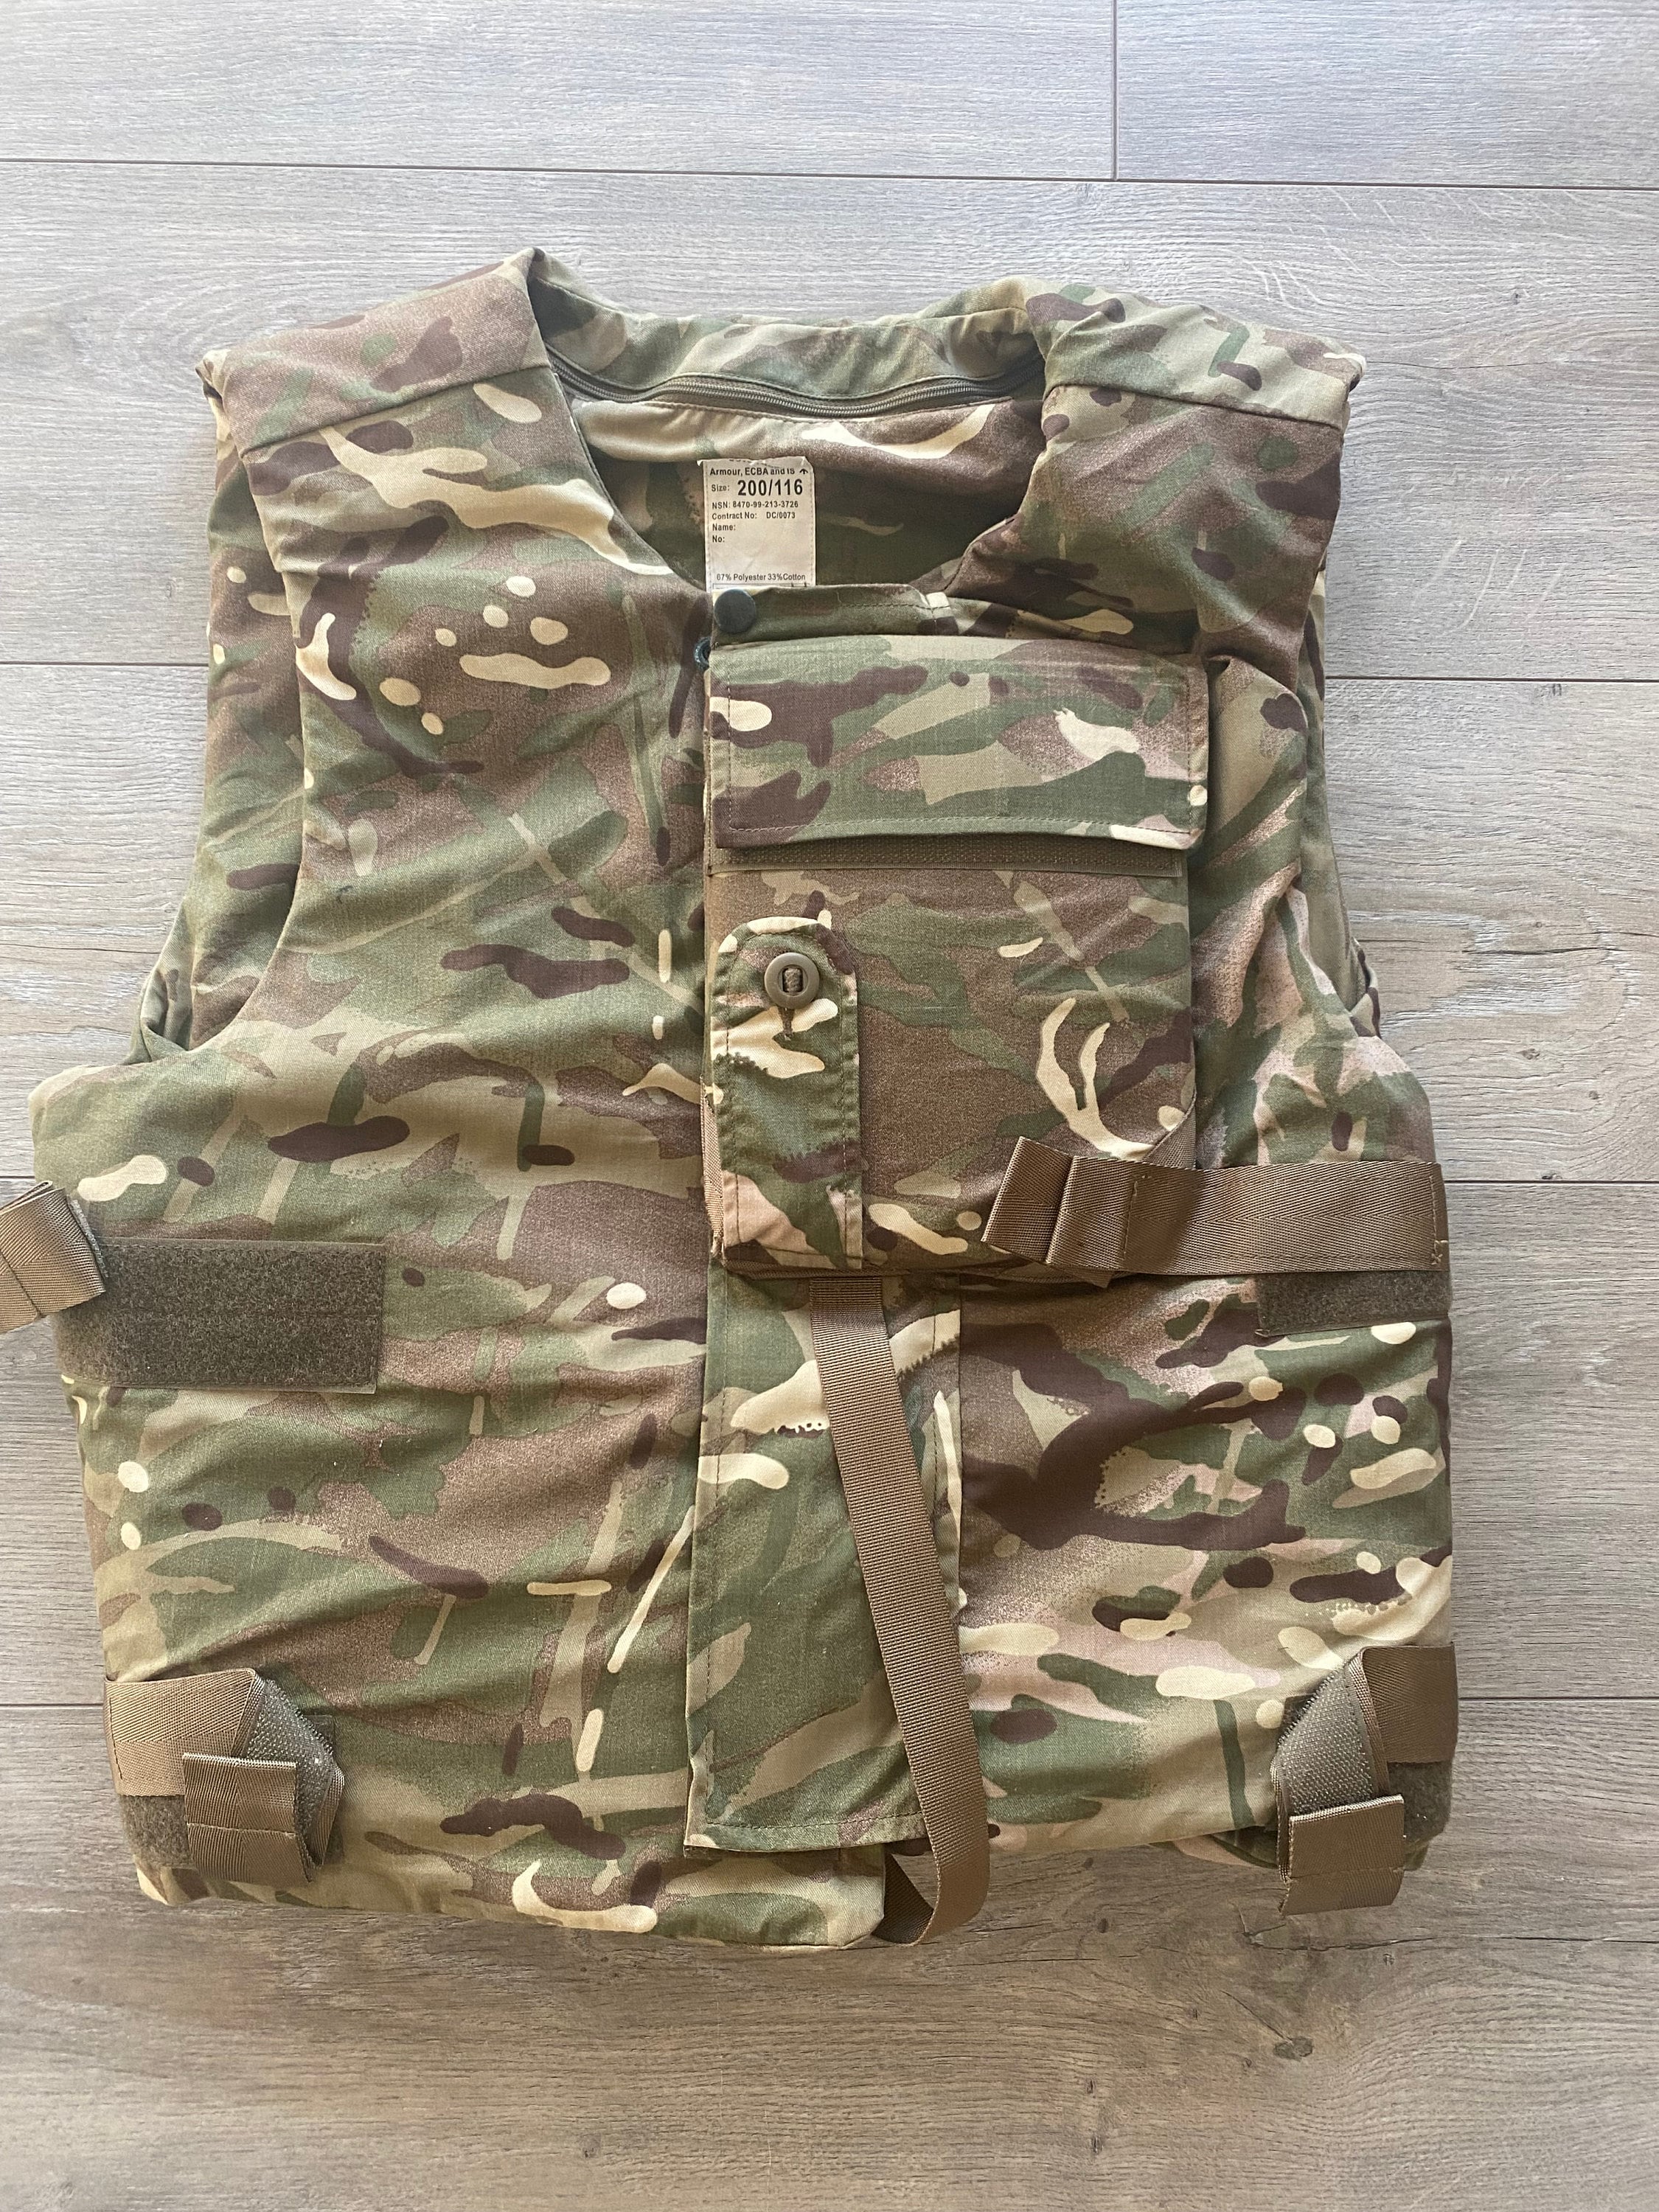 Fashion Police Body Armor Bulletproof Vest Tactical Plate Carrier Military Vest  Bullet Proof - China Bullet Proof Vests and Bullet Proof Vest in Pakistan  price